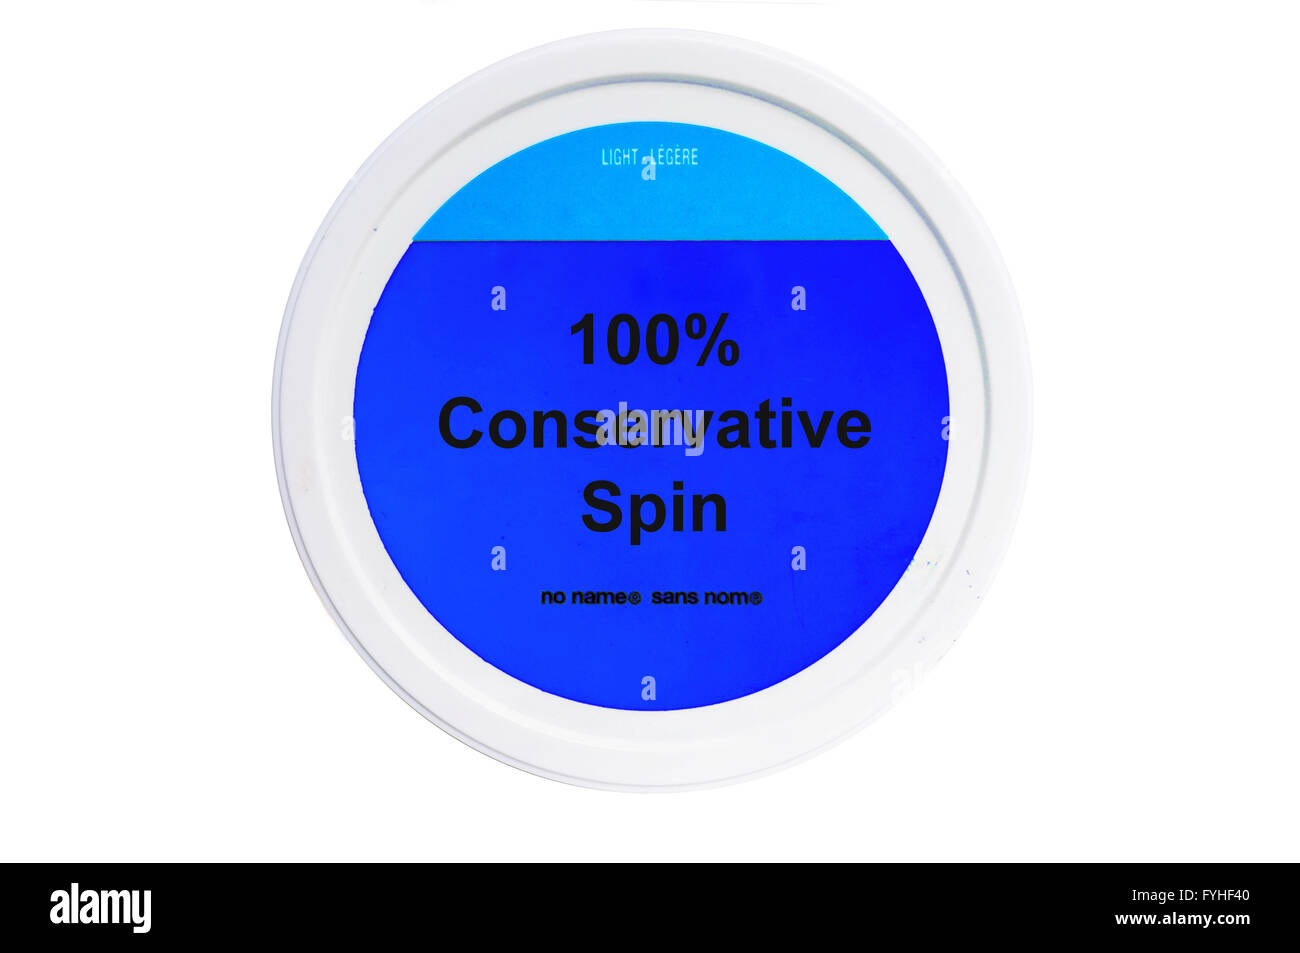 A tub with 100% Conservative Spin written on the label photographed against a white background. Stock Photo